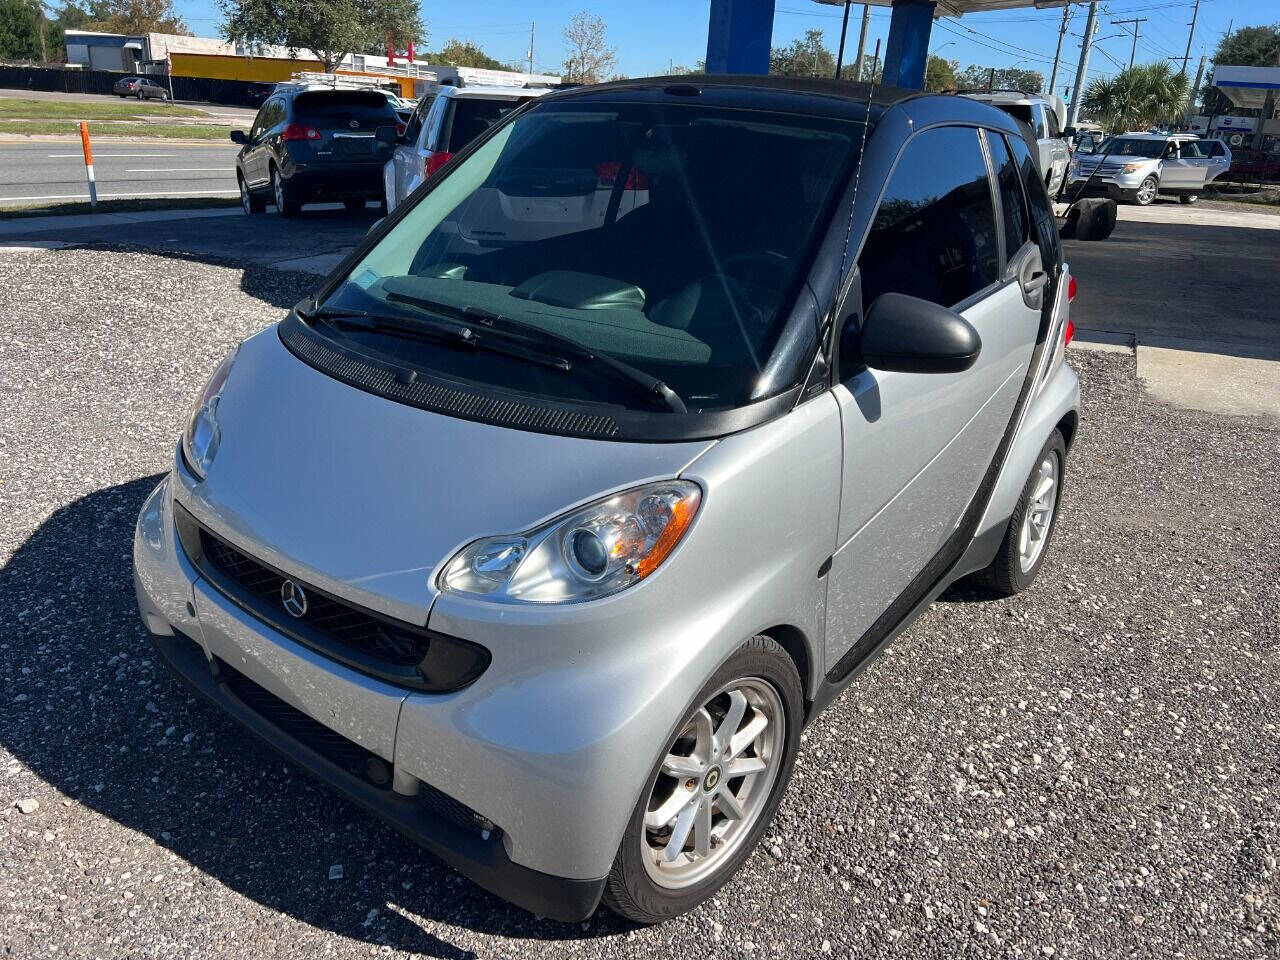 Smart fortwo For Sale In Owensboro, KY - ®